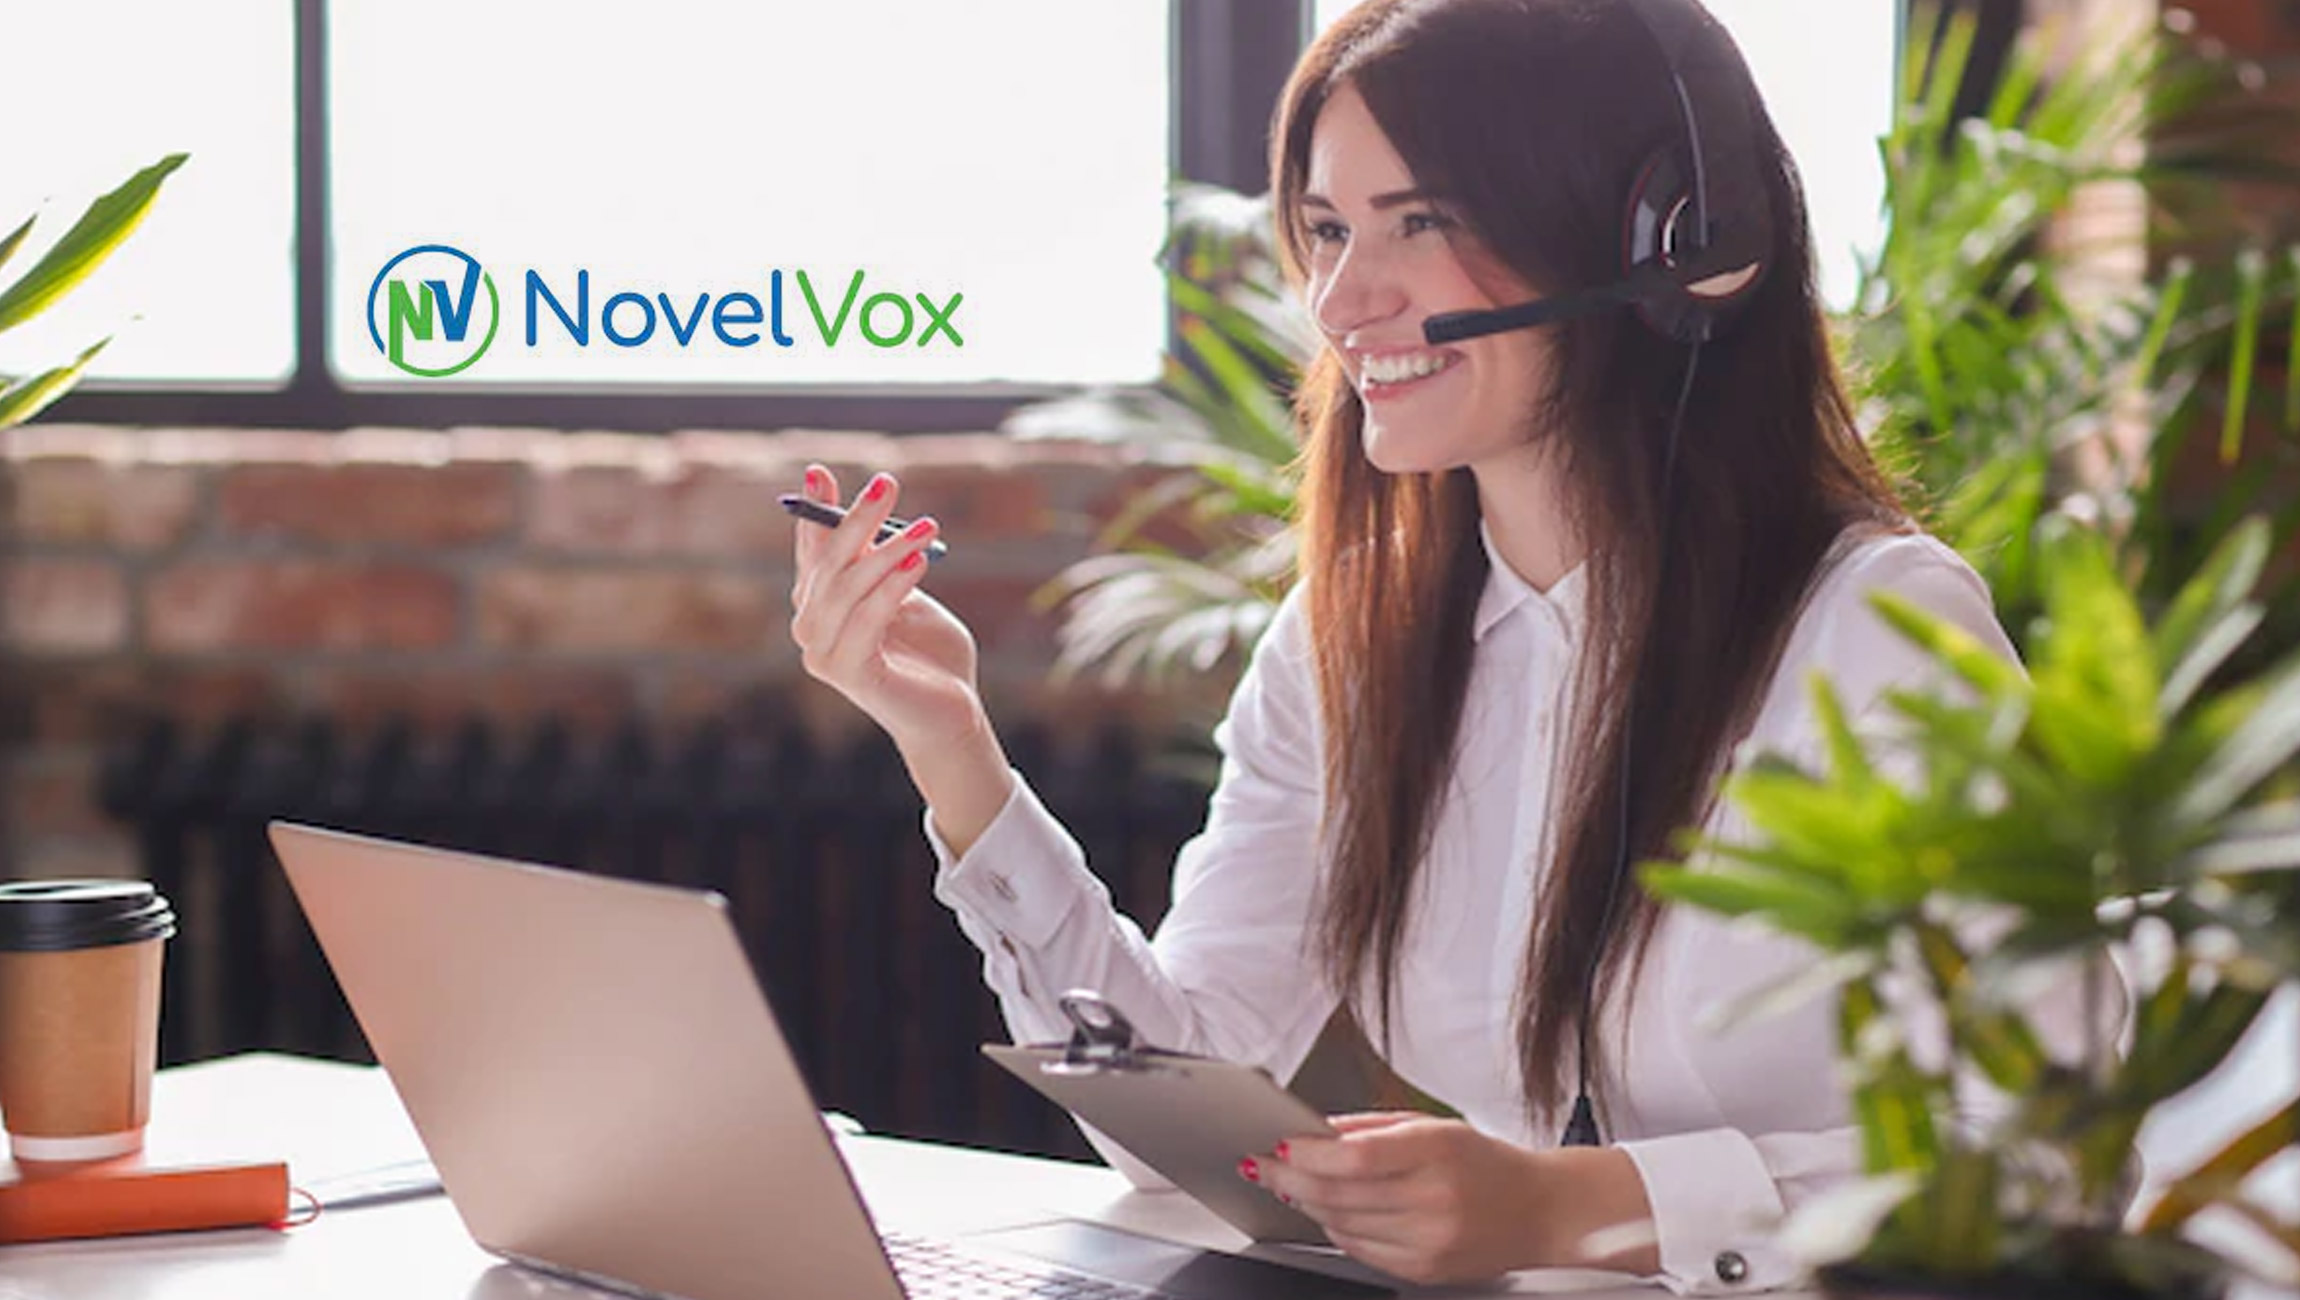 NovelVox Introduces Intuitive Visual IVR for Cisco, Avaya, and Genesys Contact Centers